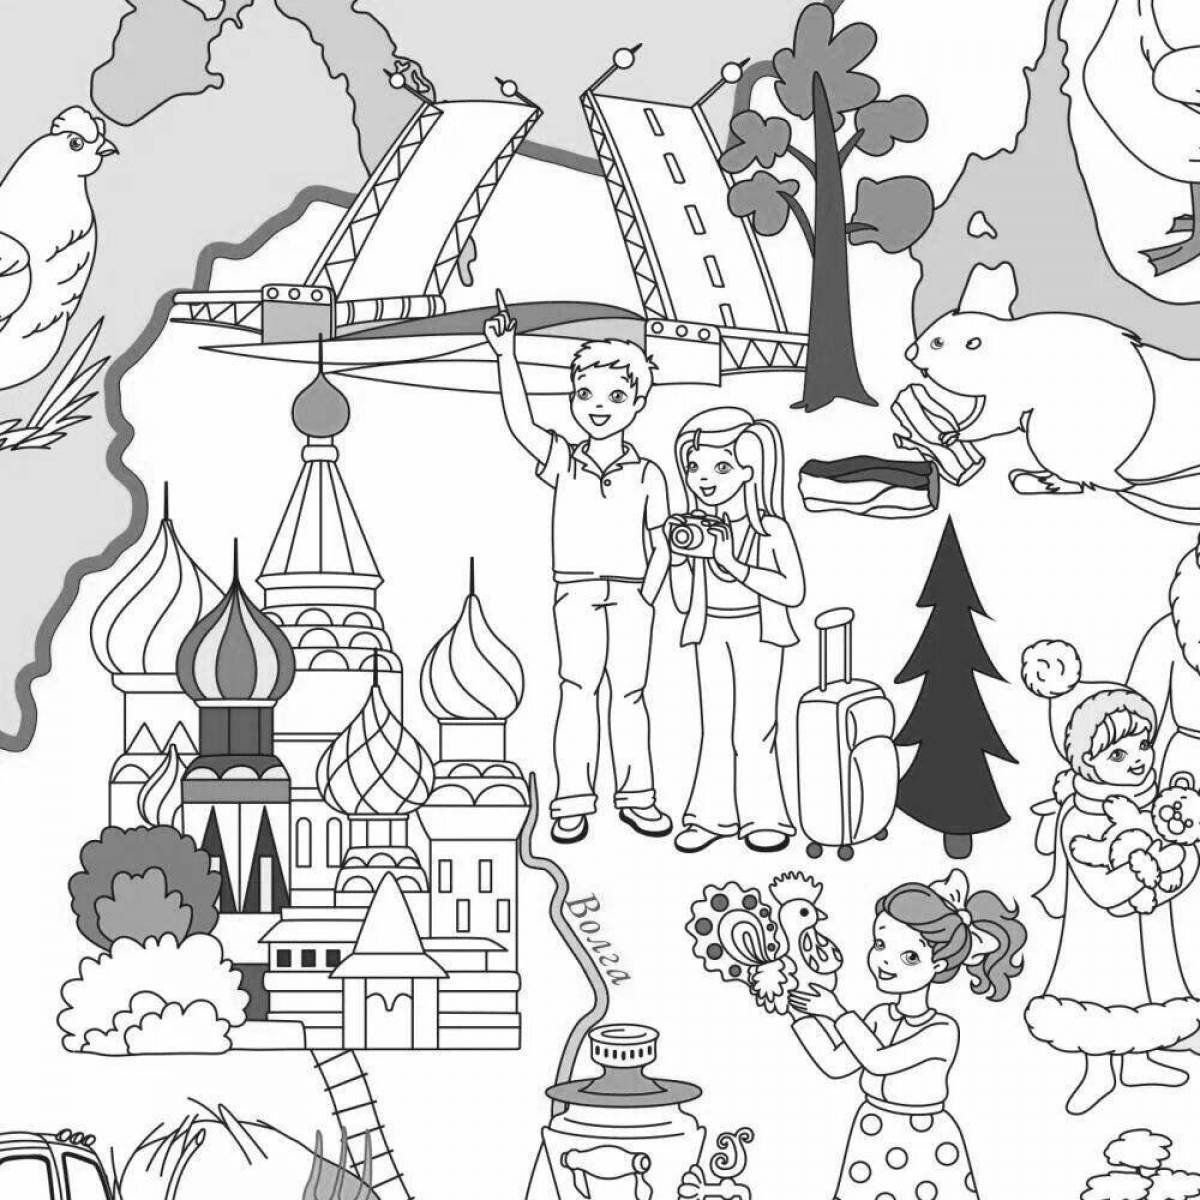 Charming russia coloring book for kids